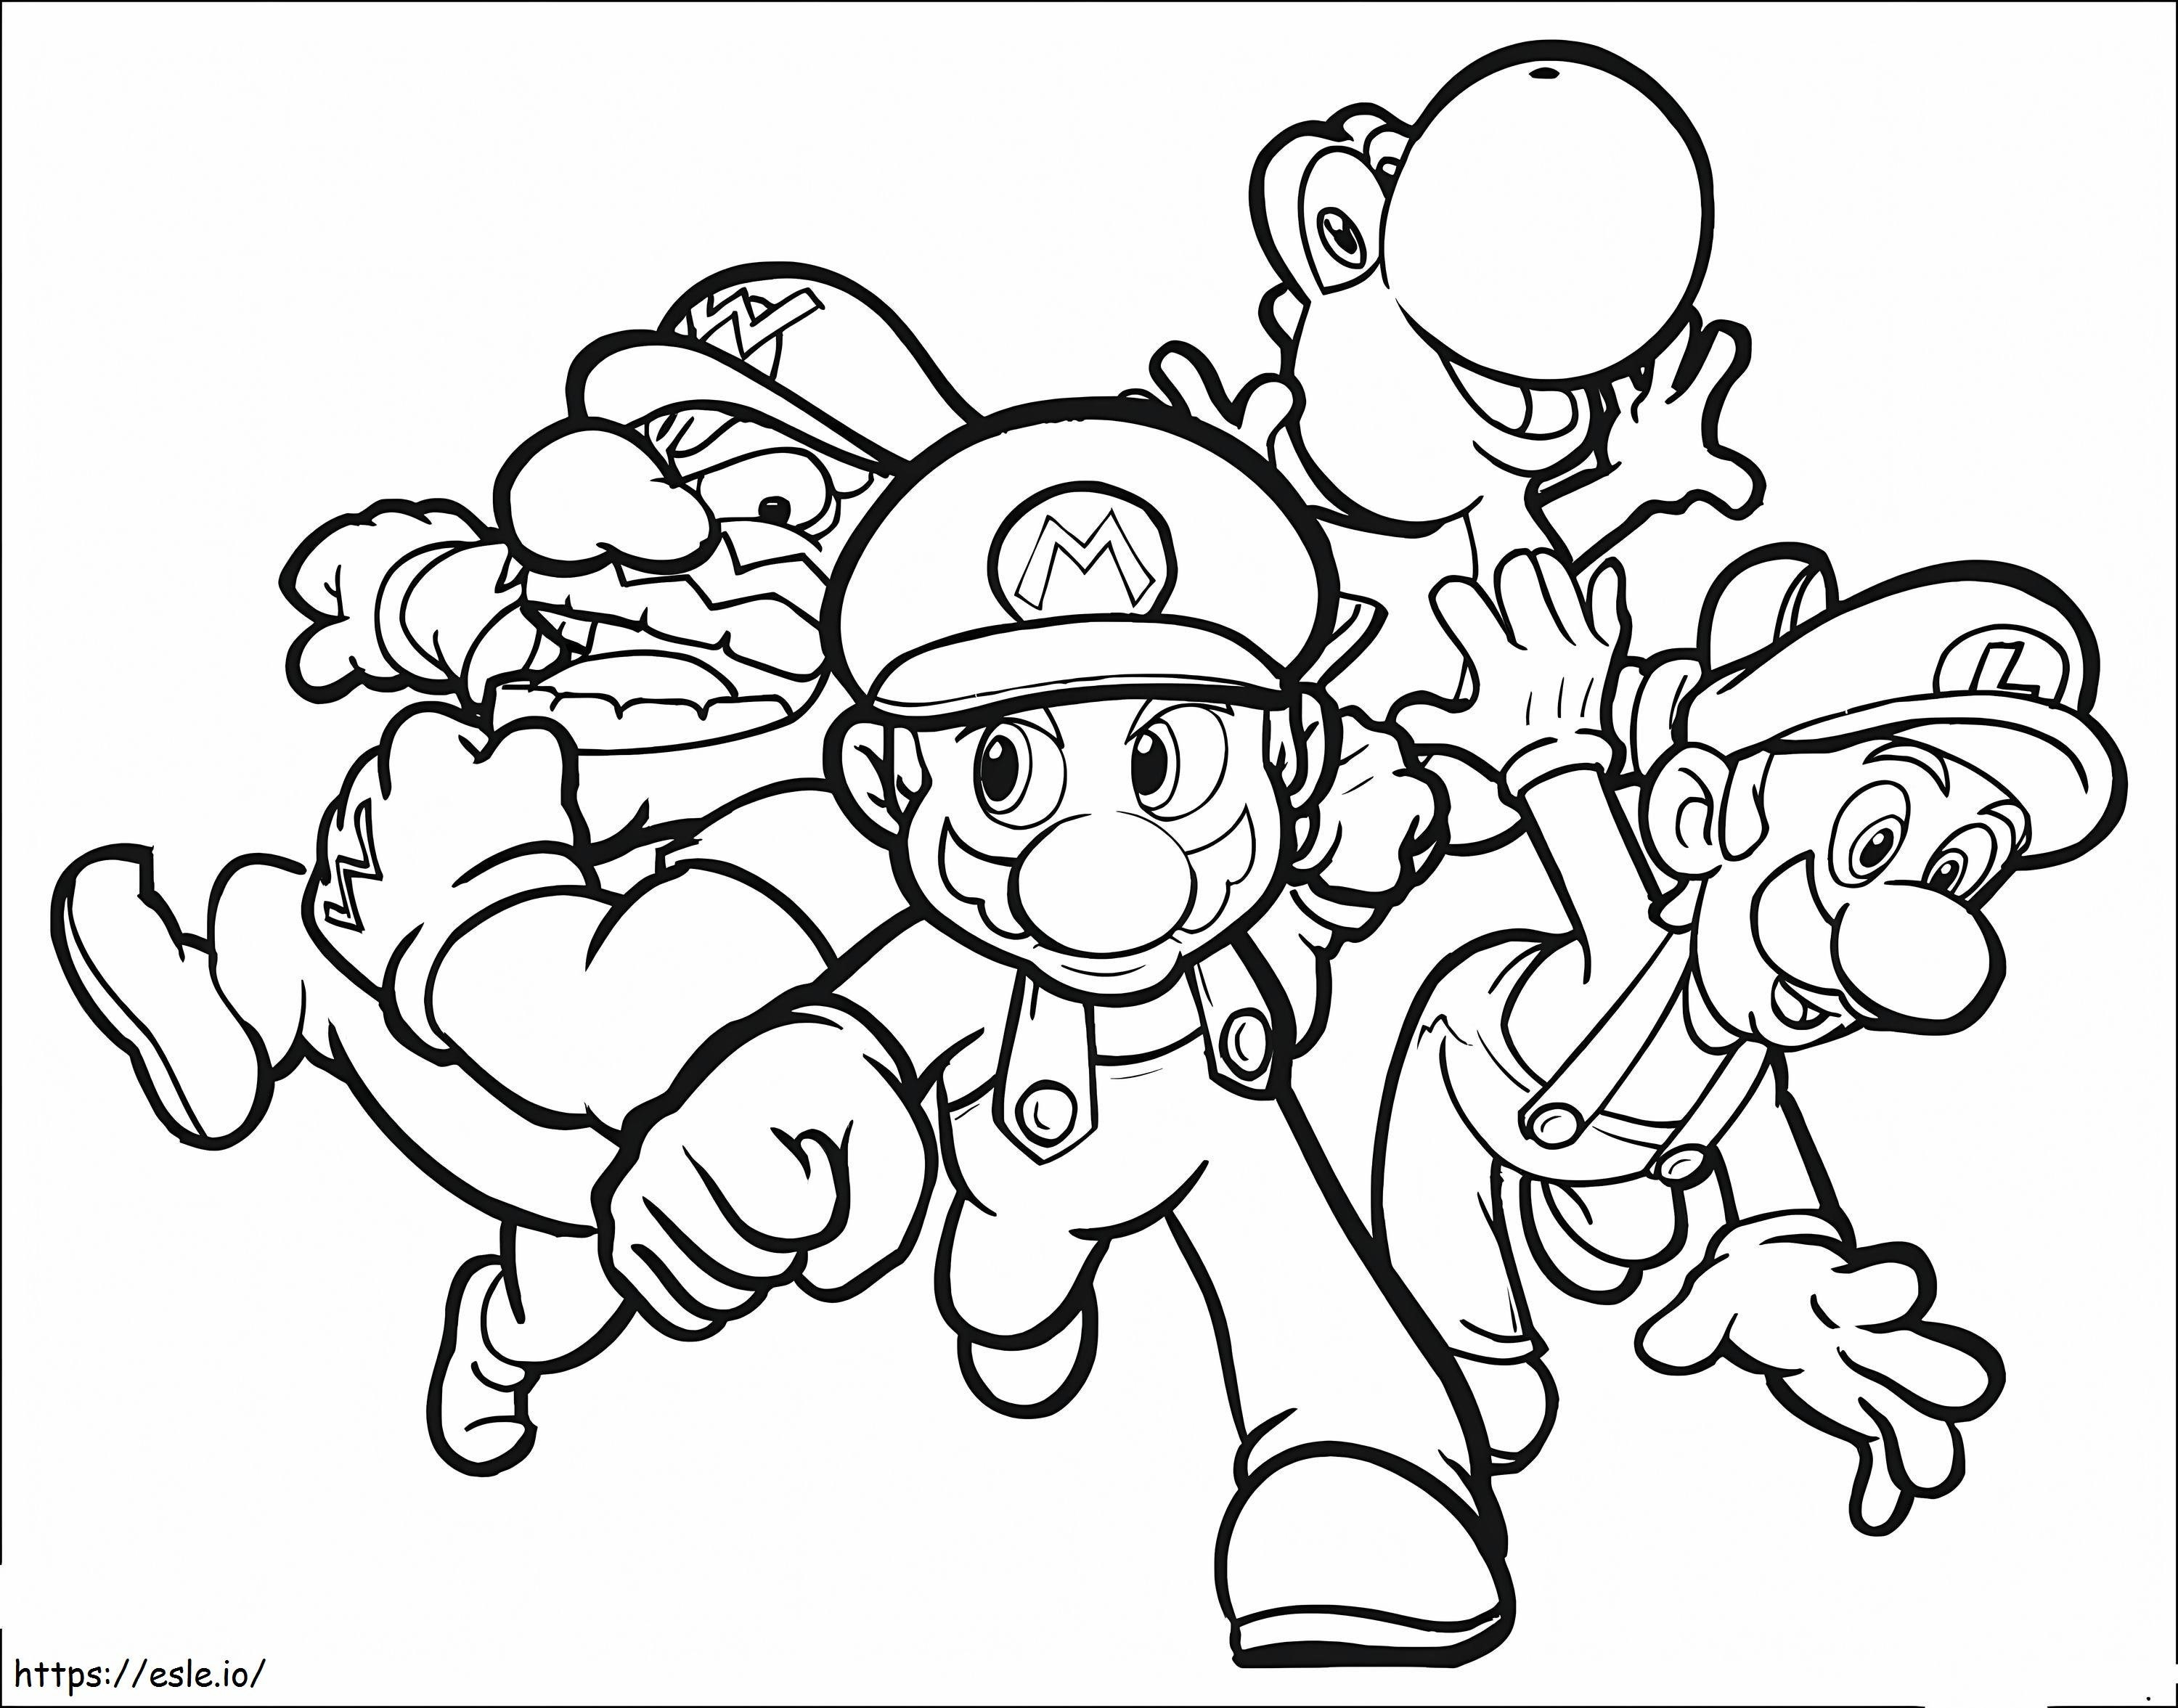 Wario And Character coloring page